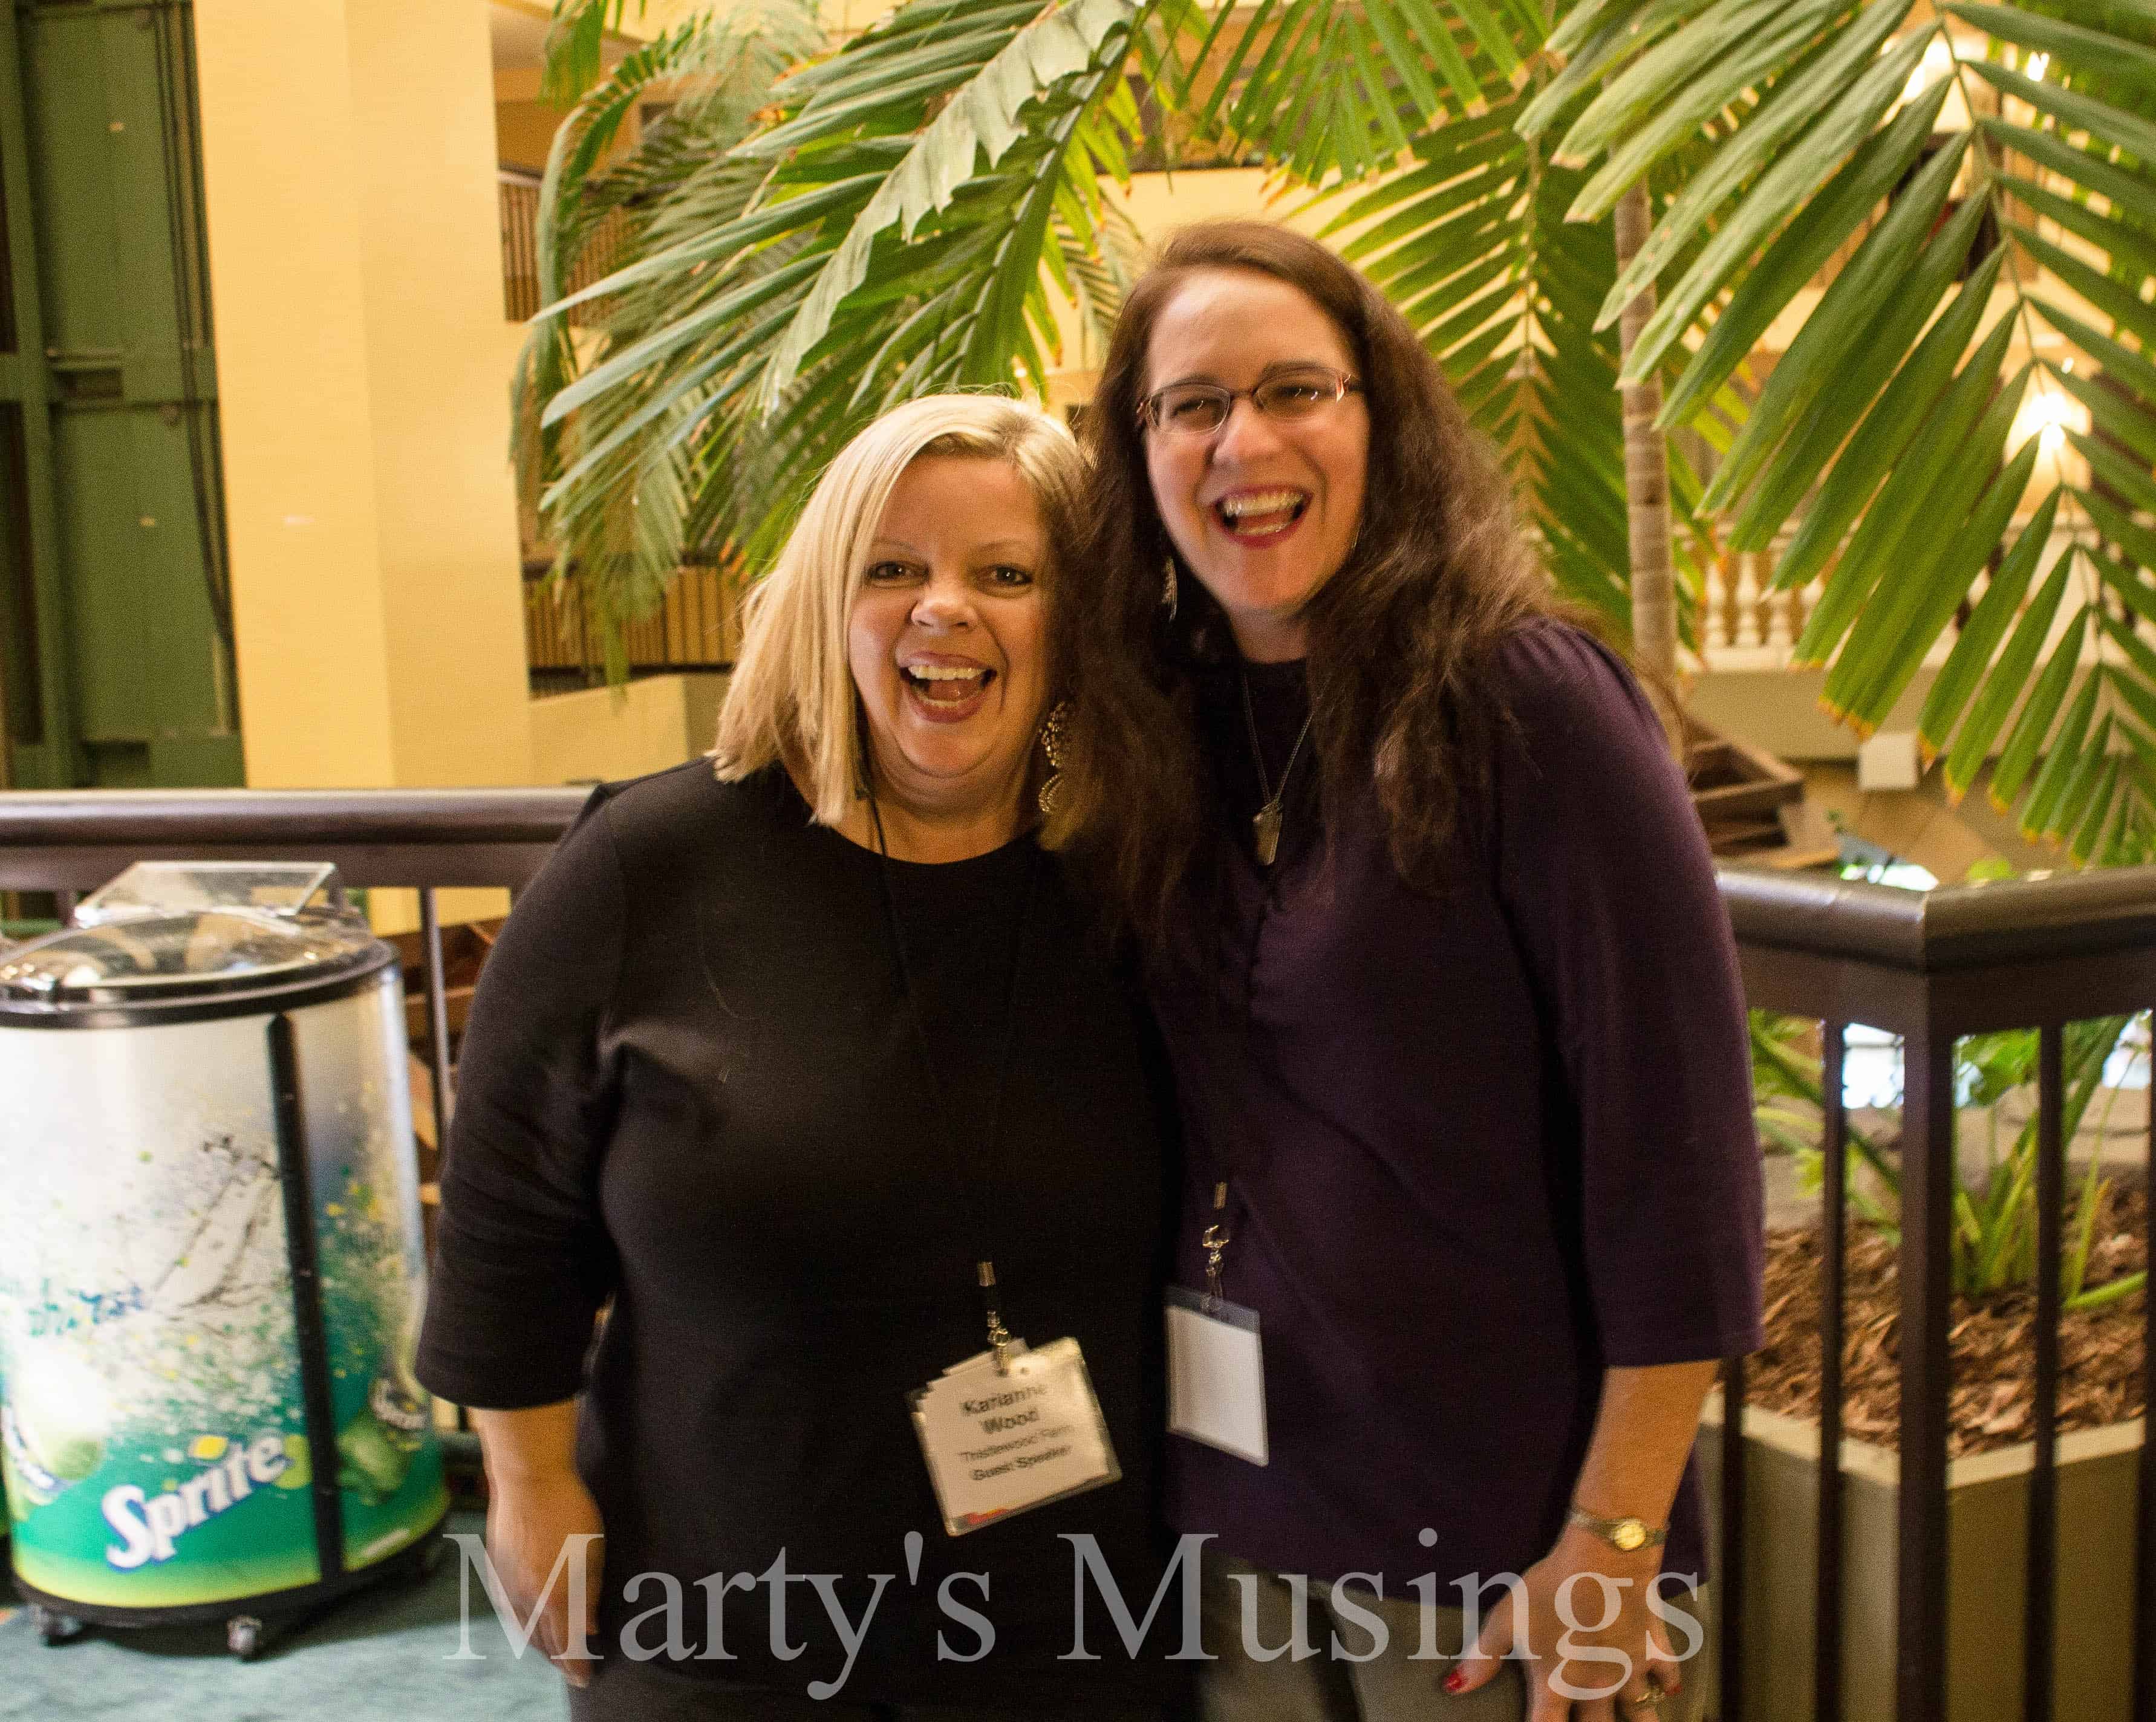 An Imposter at the Southern Bloggers Conference